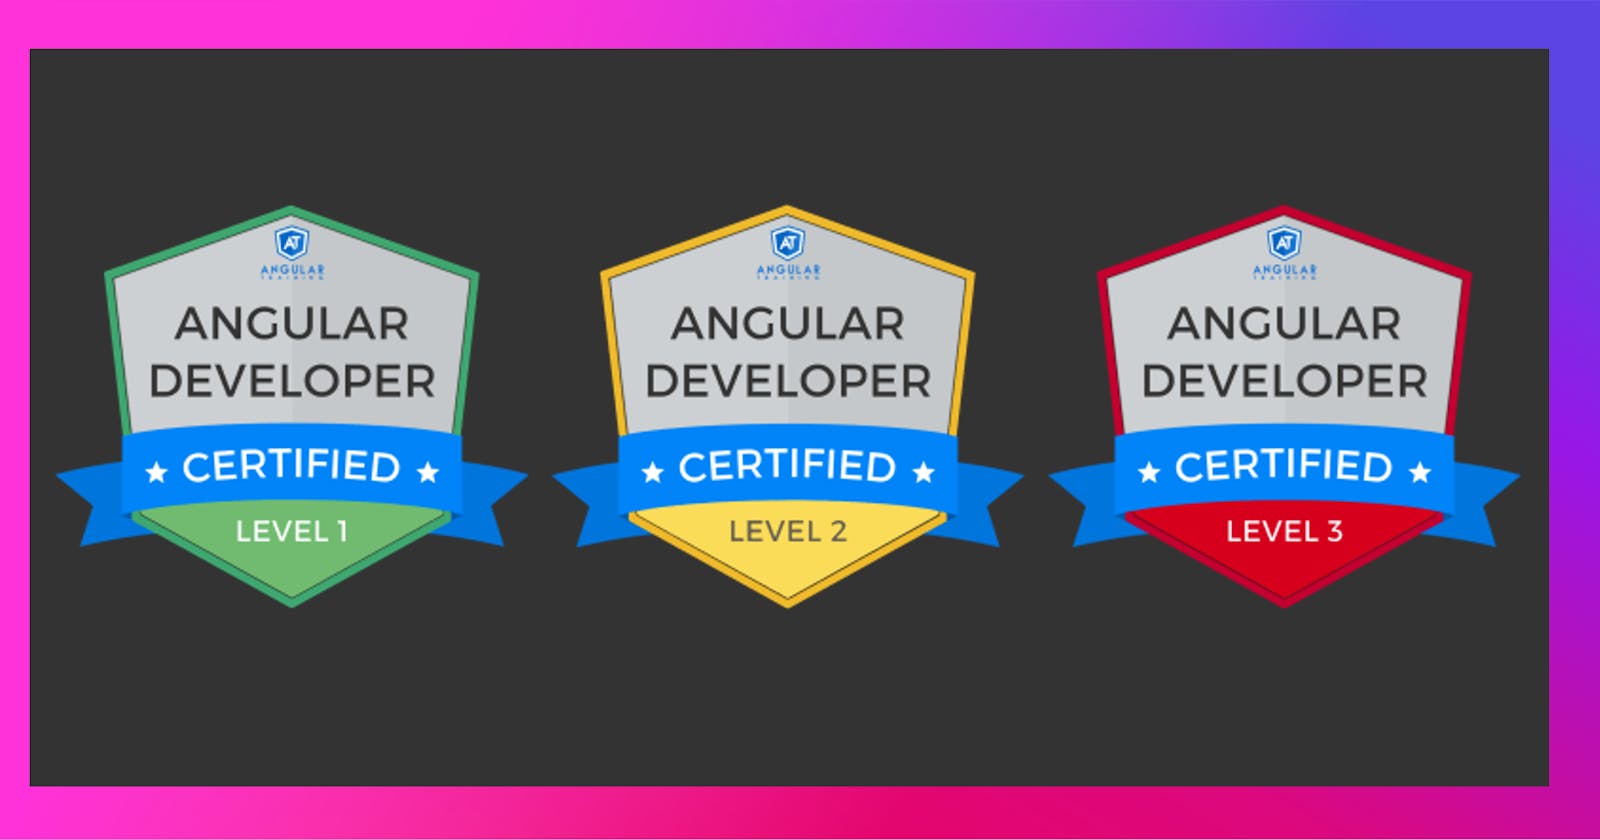 Get your Angular Certification!